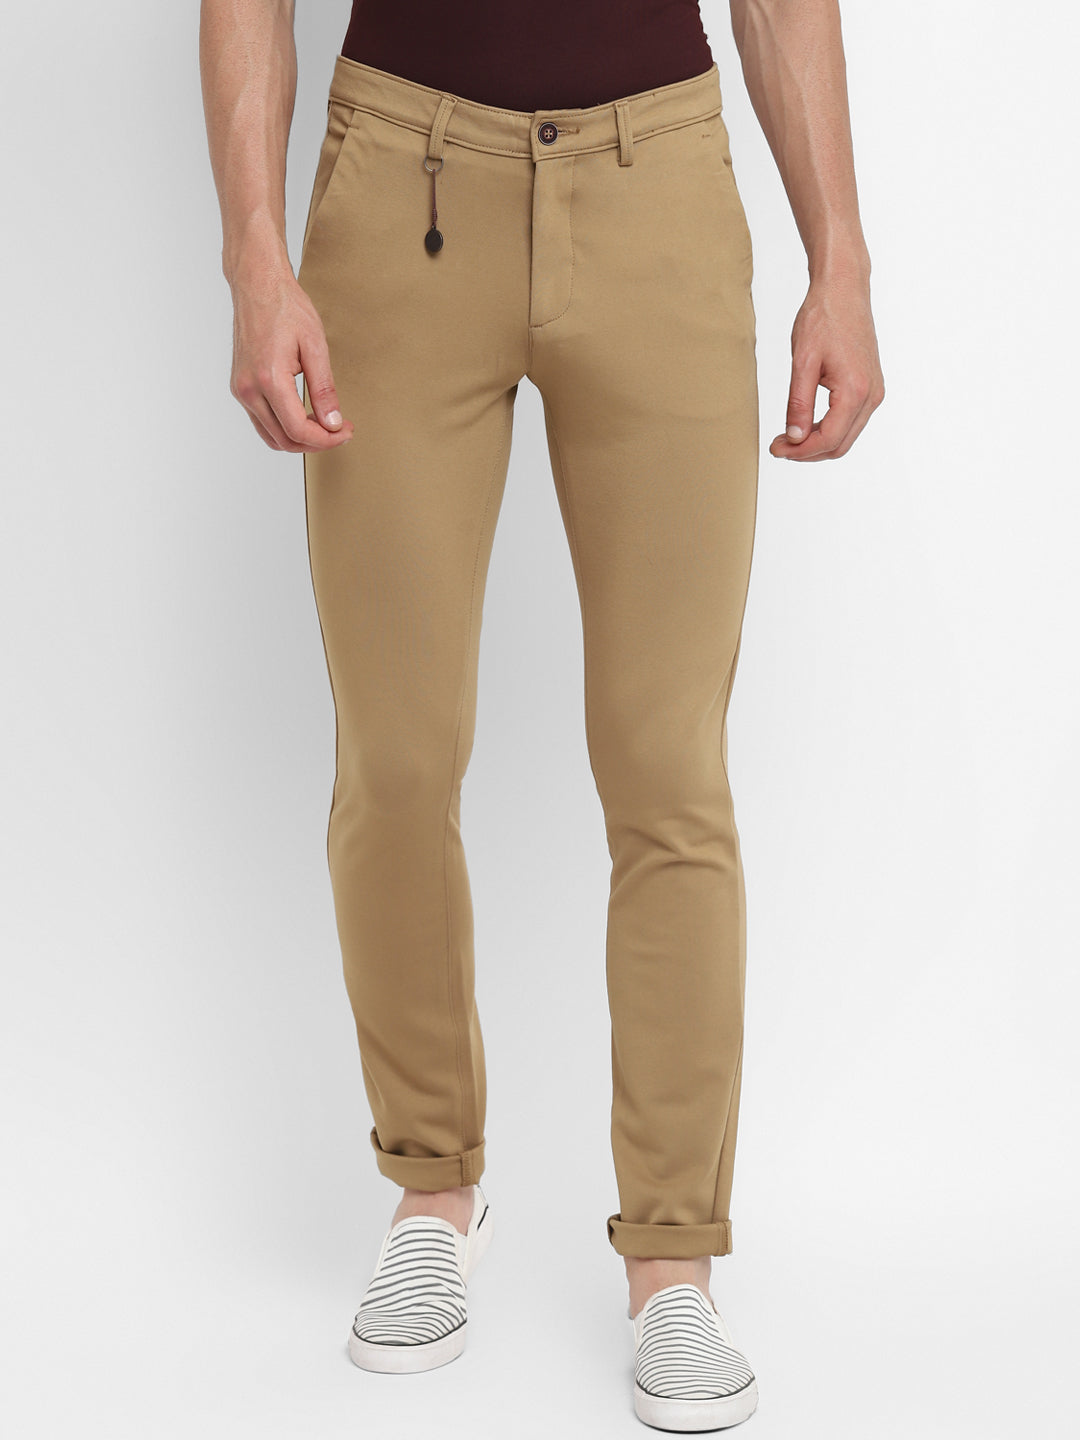 Narrow-fit slimming brushed pant | Contemporaine | Shop Women%u2019s Skinny  Pants Online in Canada | Simons